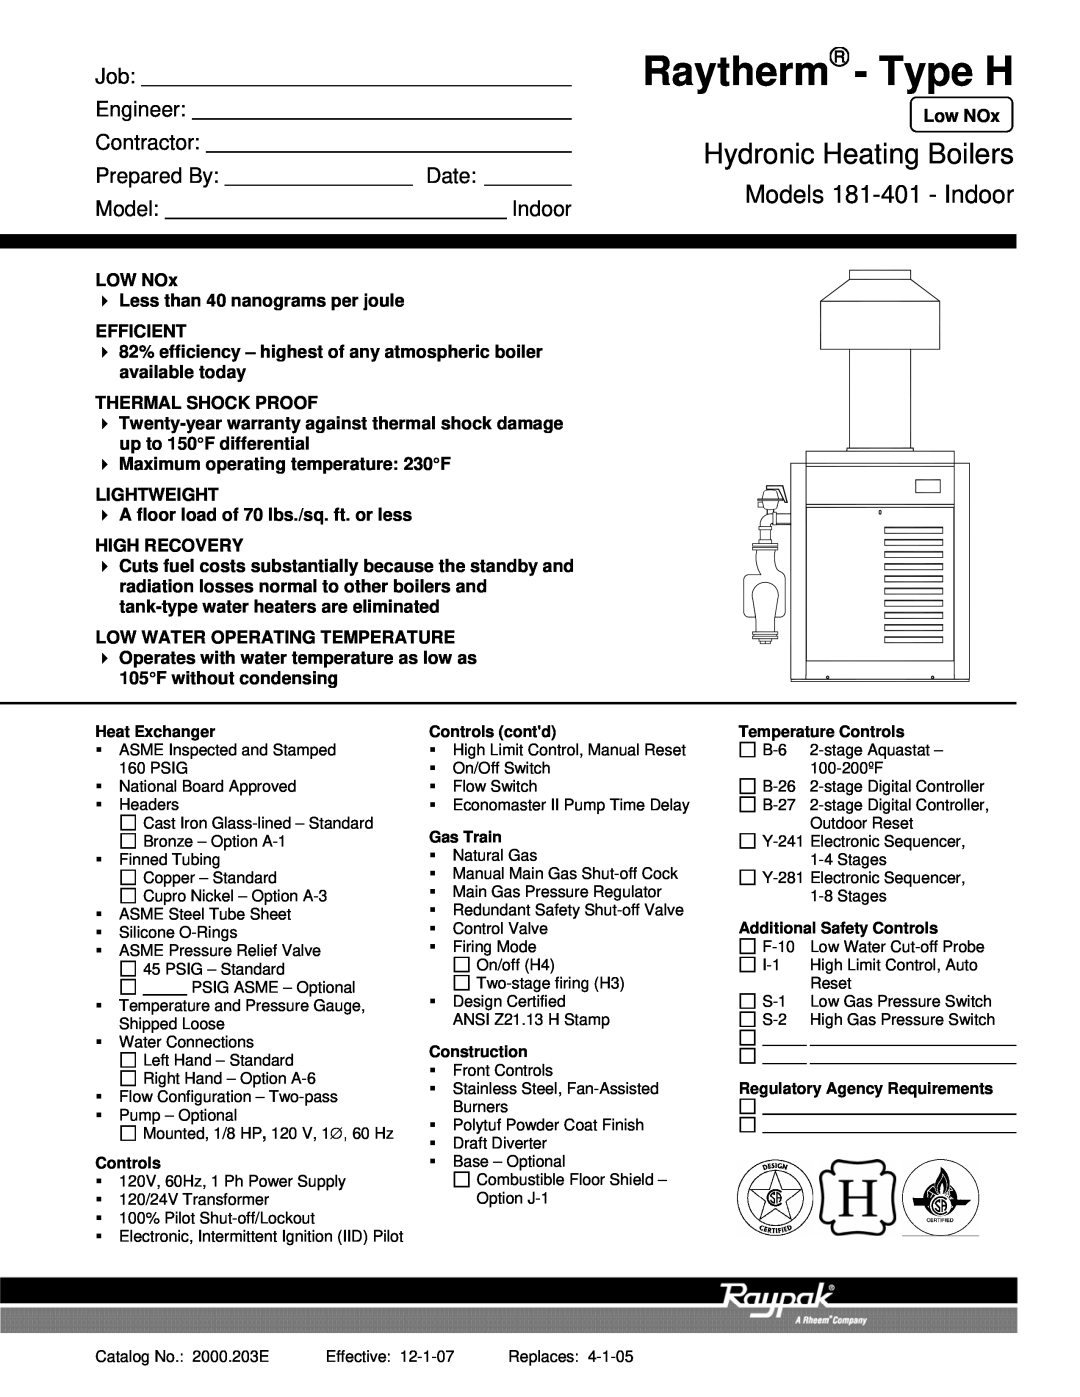 Raypak warranty Raytherm - Type H, Hydronic Heating Boilers, Models 181-401- Indoor, Engineer, Contractor, Prepared By 